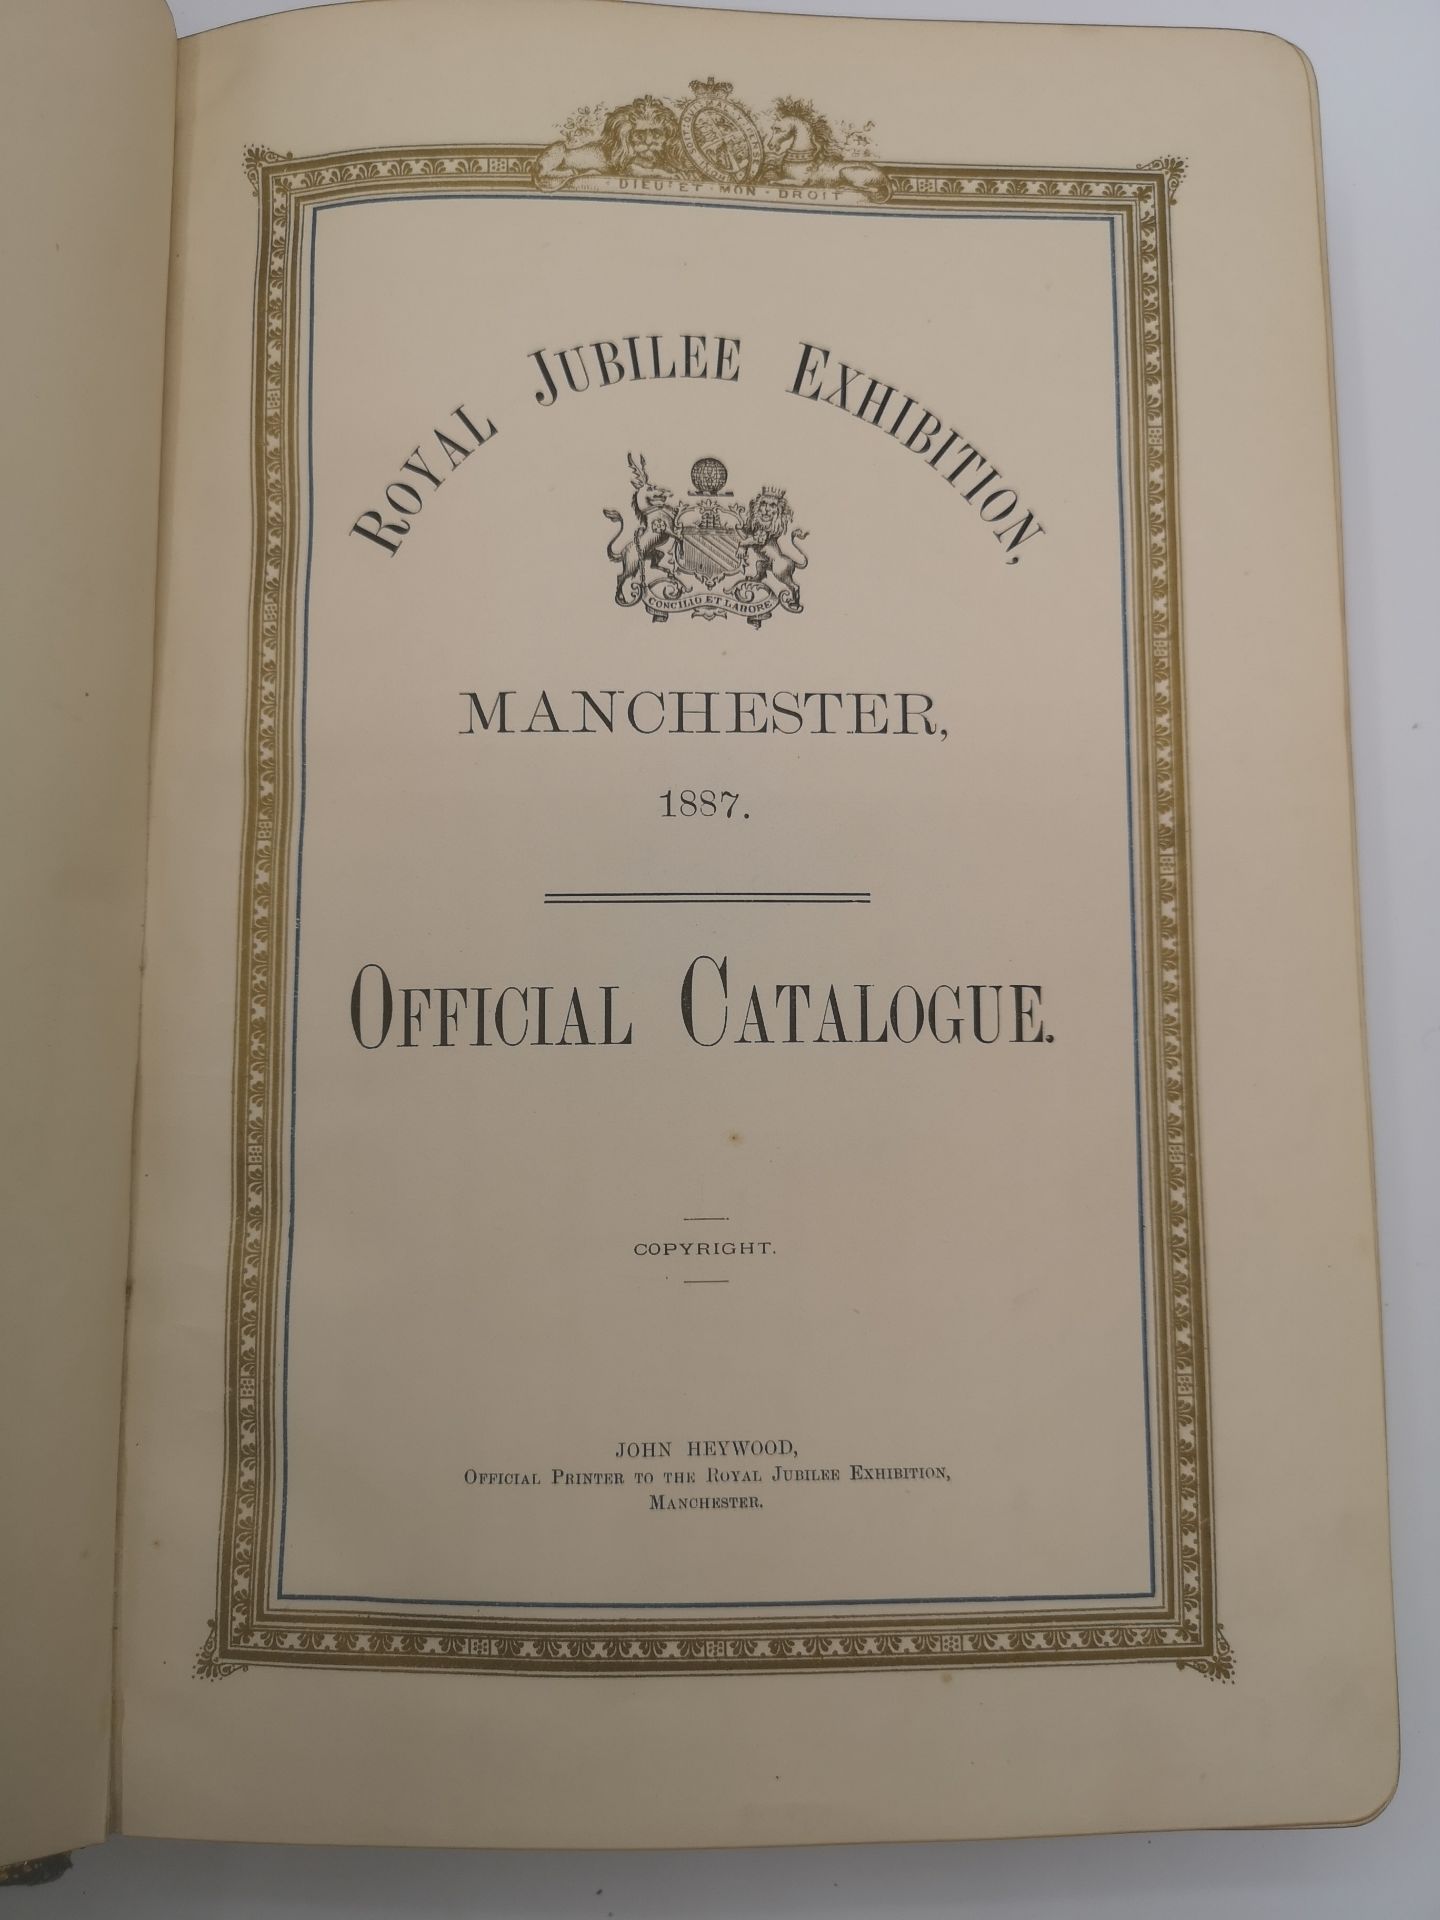 Royal Jubilee Exhibition Manchester 1887 Official Catalogue; with two other books - Image 5 of 5